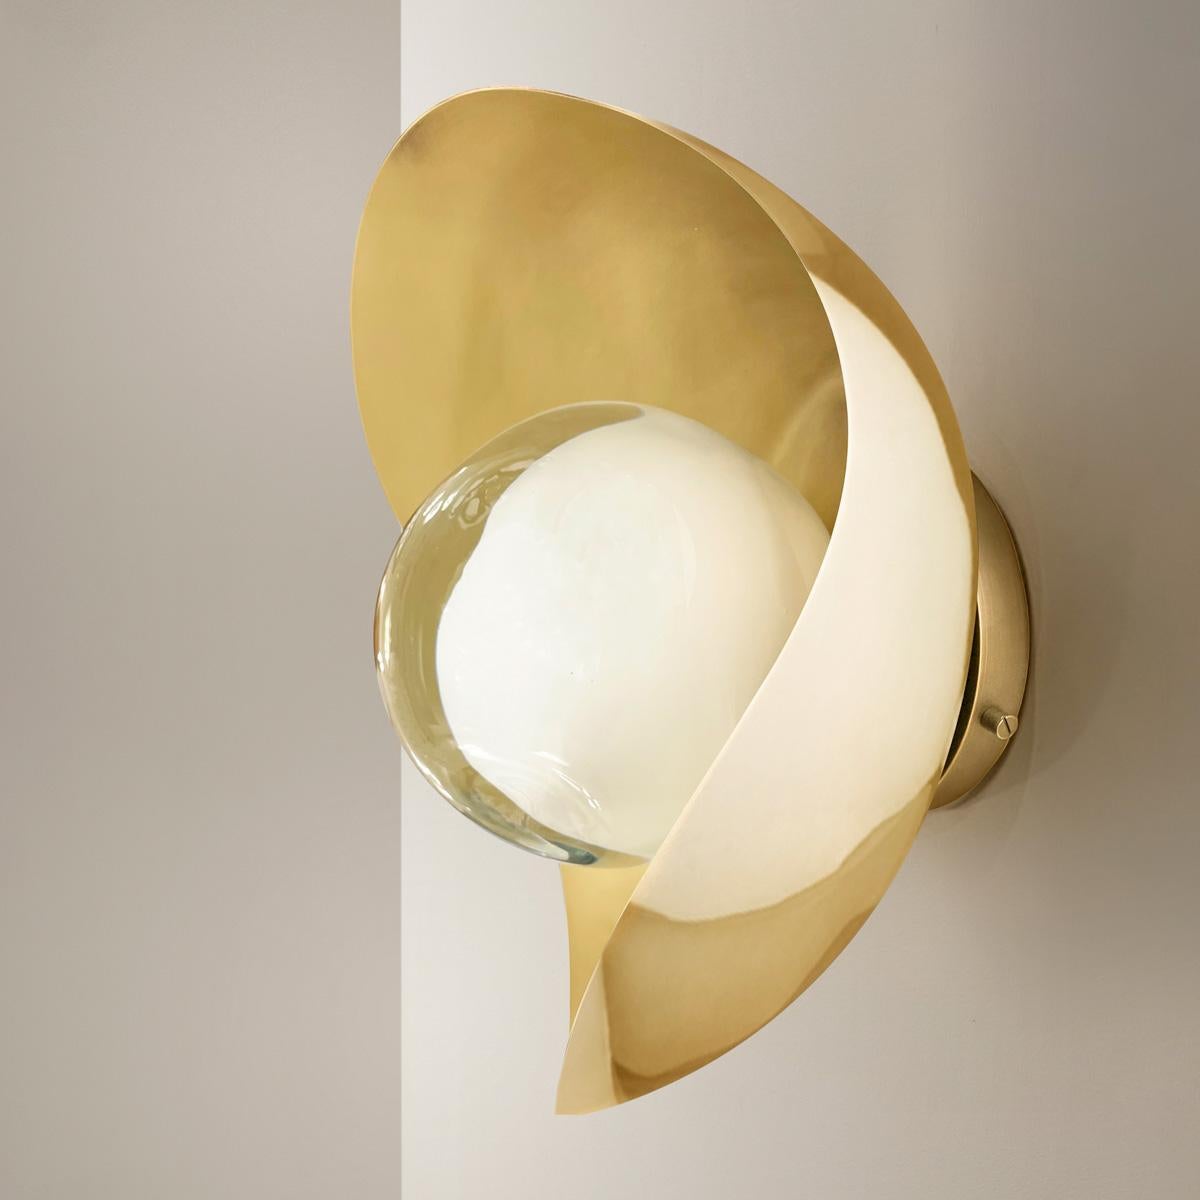 Perla Wall Light by Gaspare Asaro-Satin Brass/Polished Nickel Finish For Sale 2